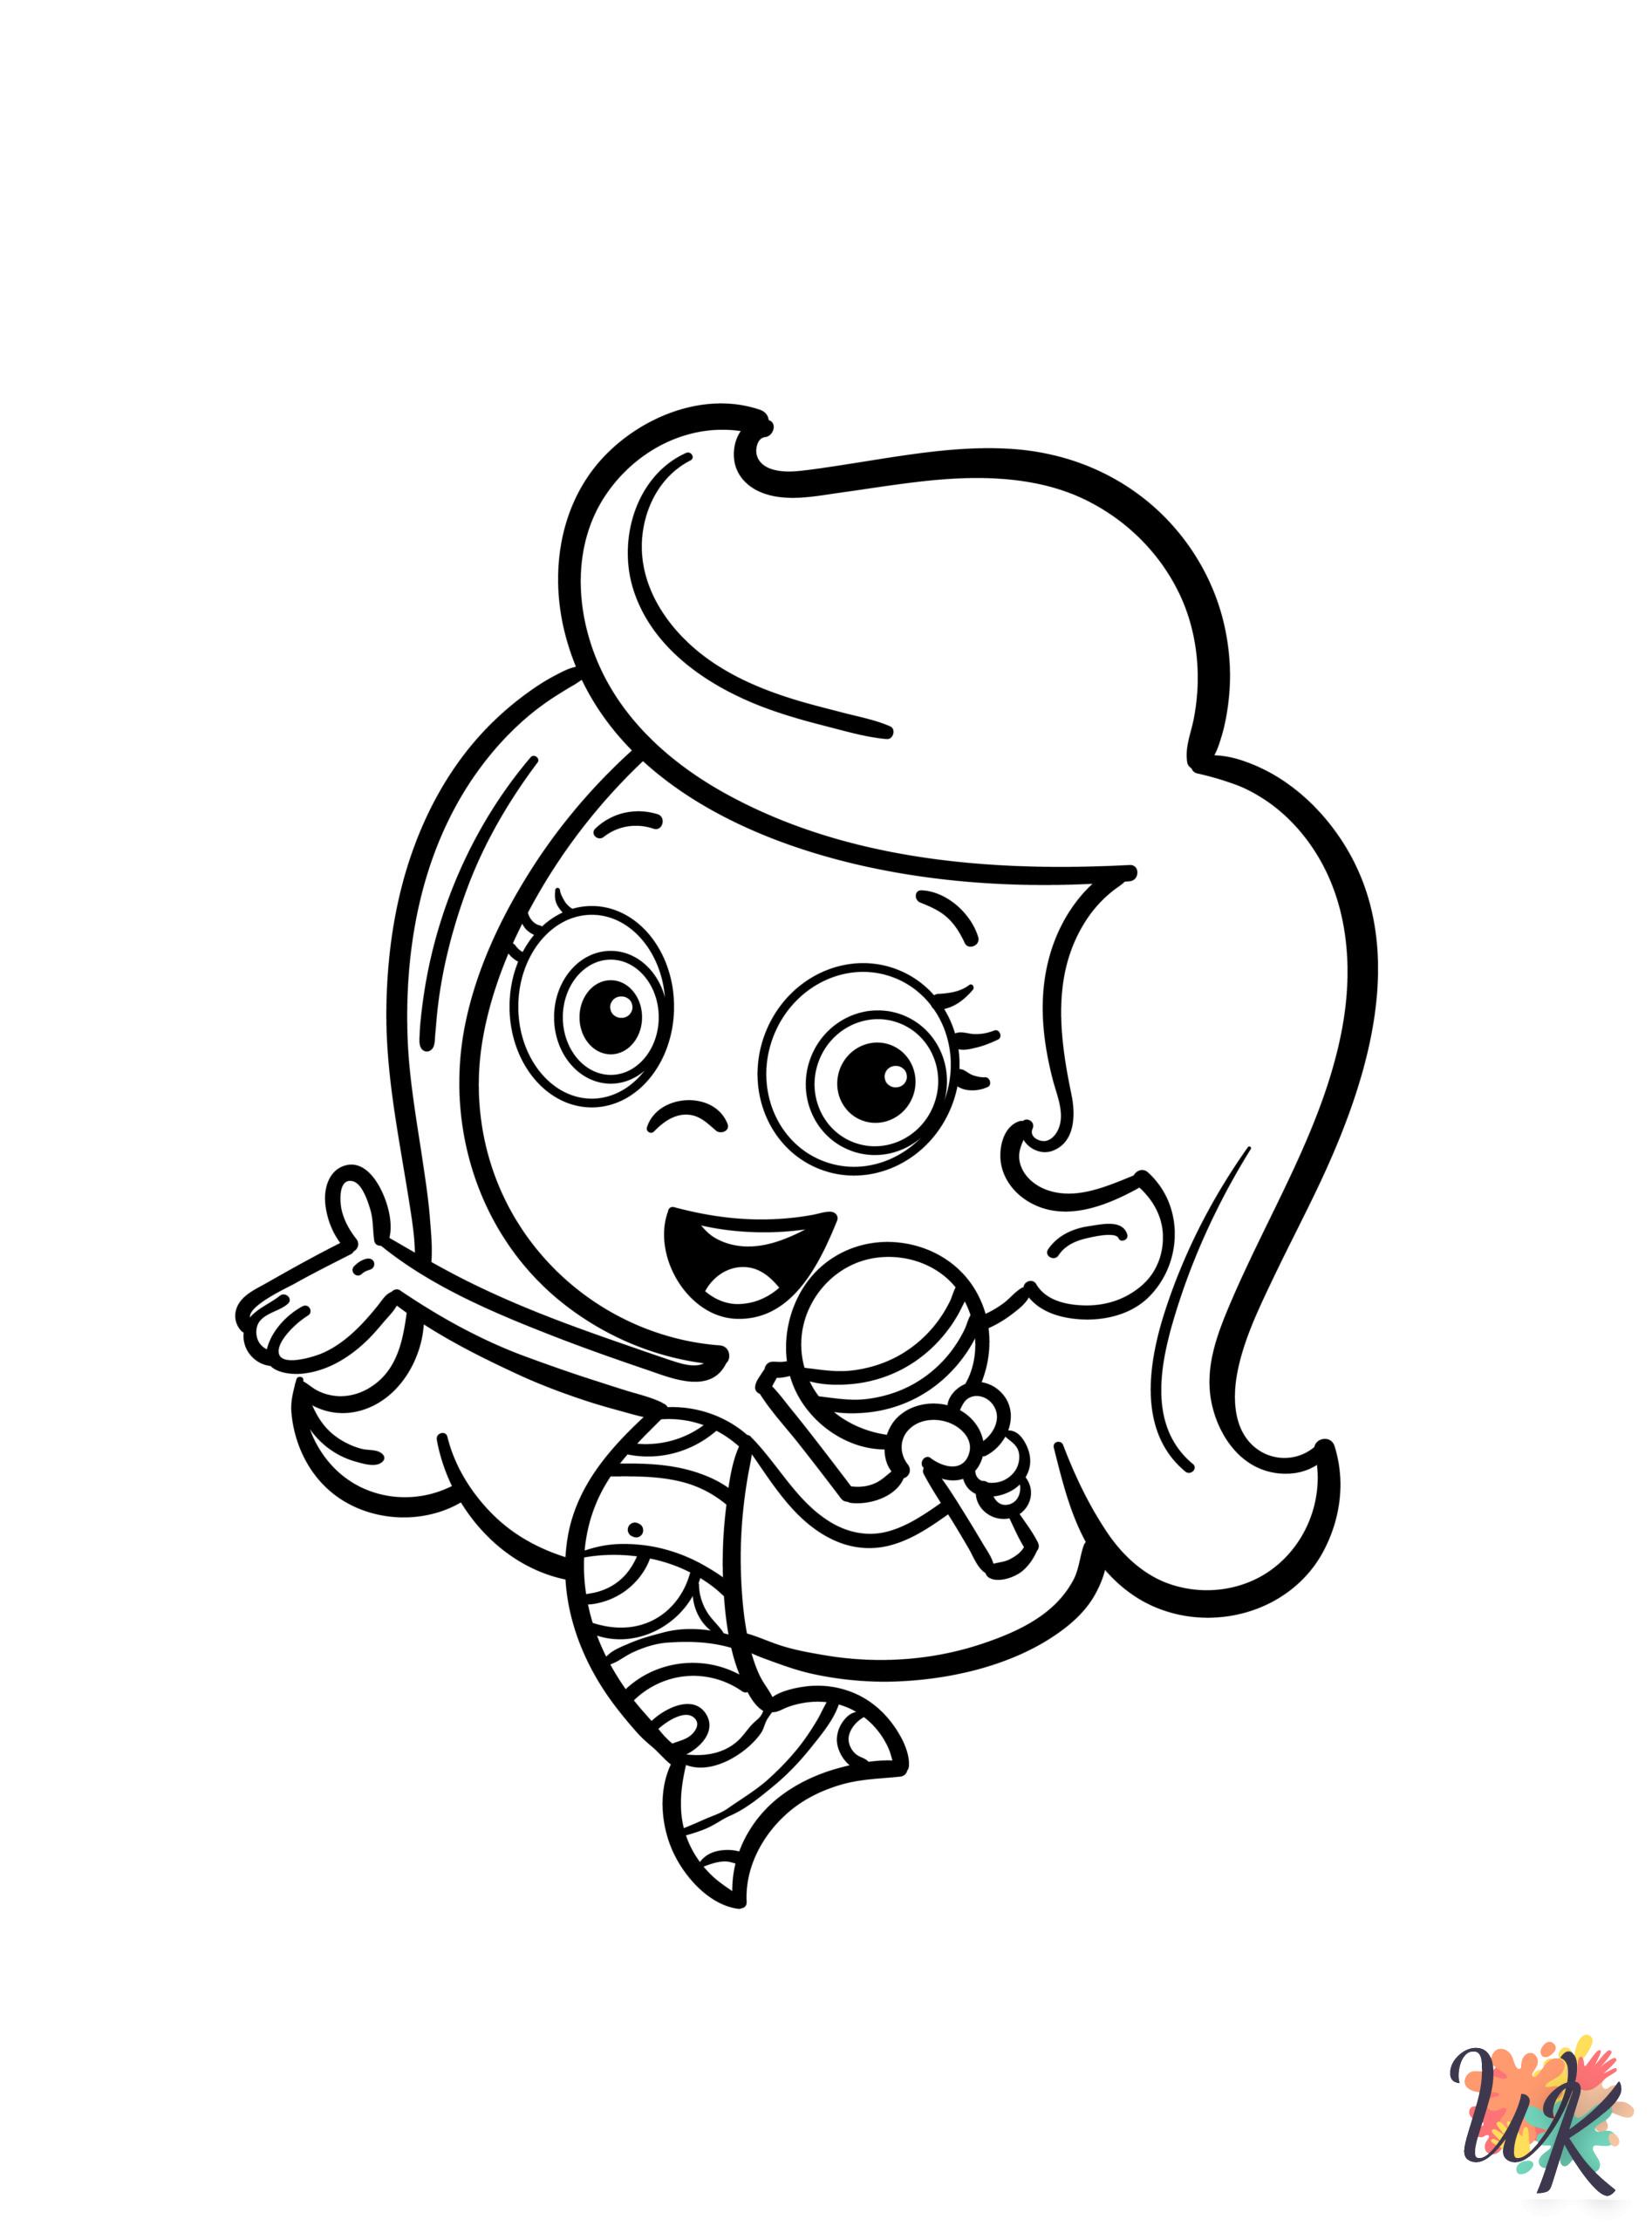 Bubble Guppies themed coloring pages